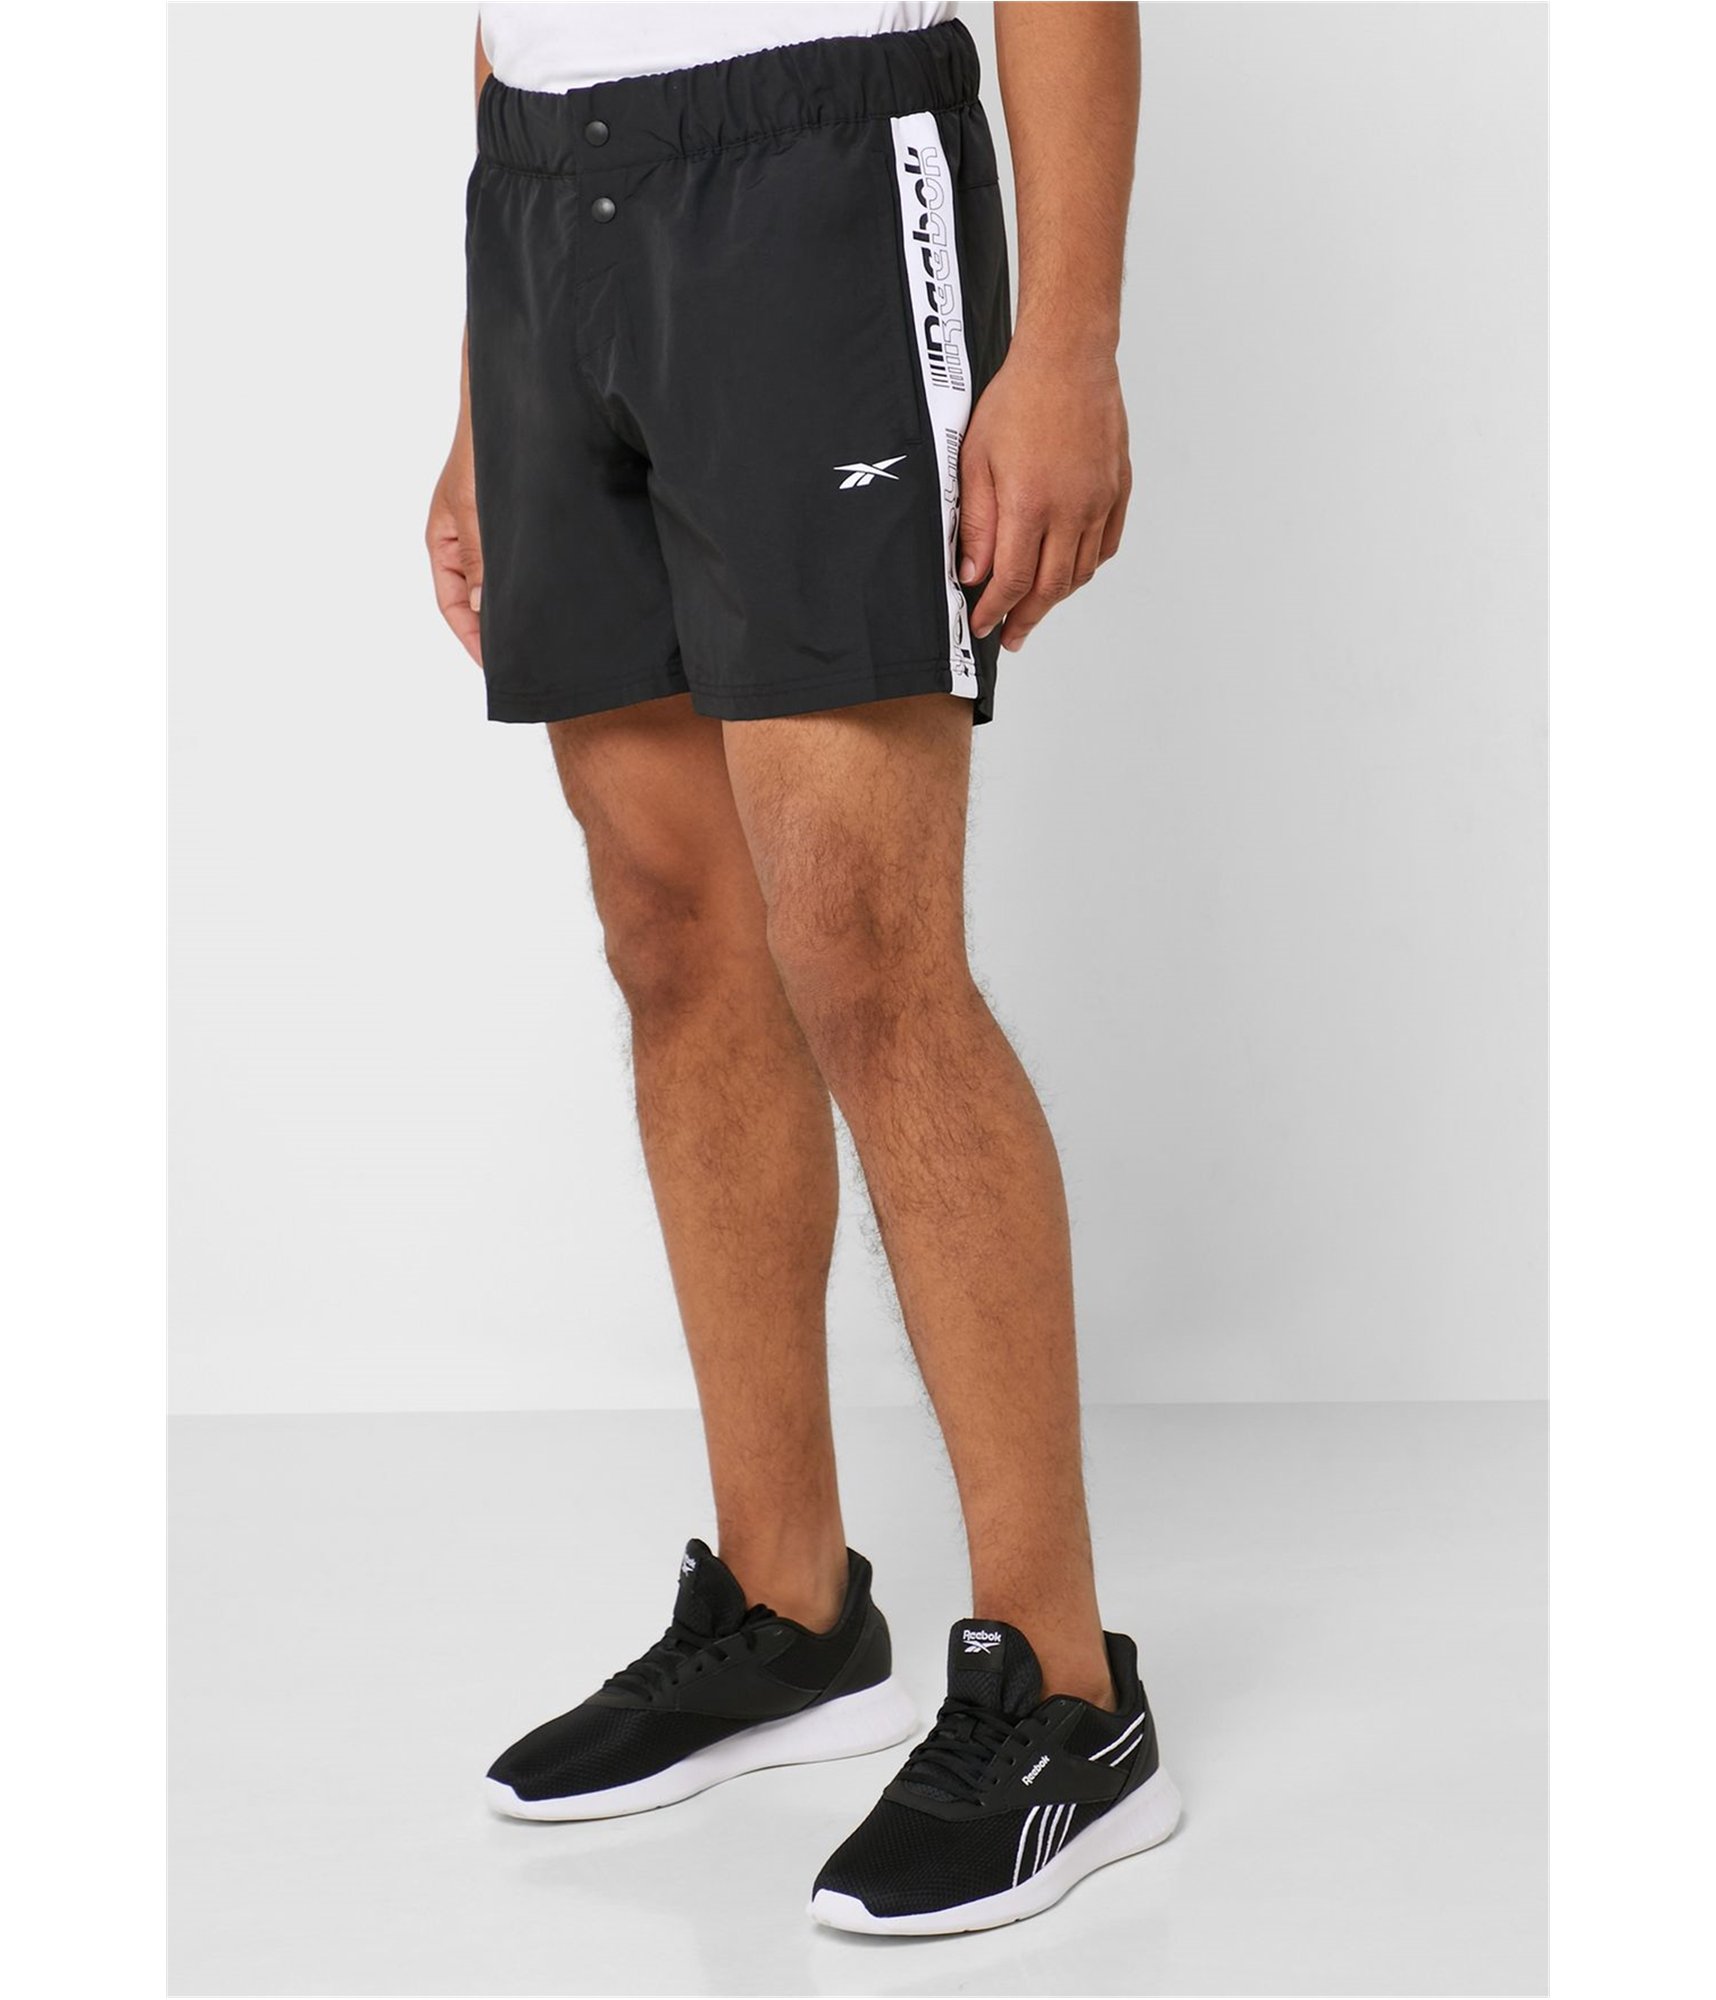 Man-wearing-button-fly-comfort-gym-shorts